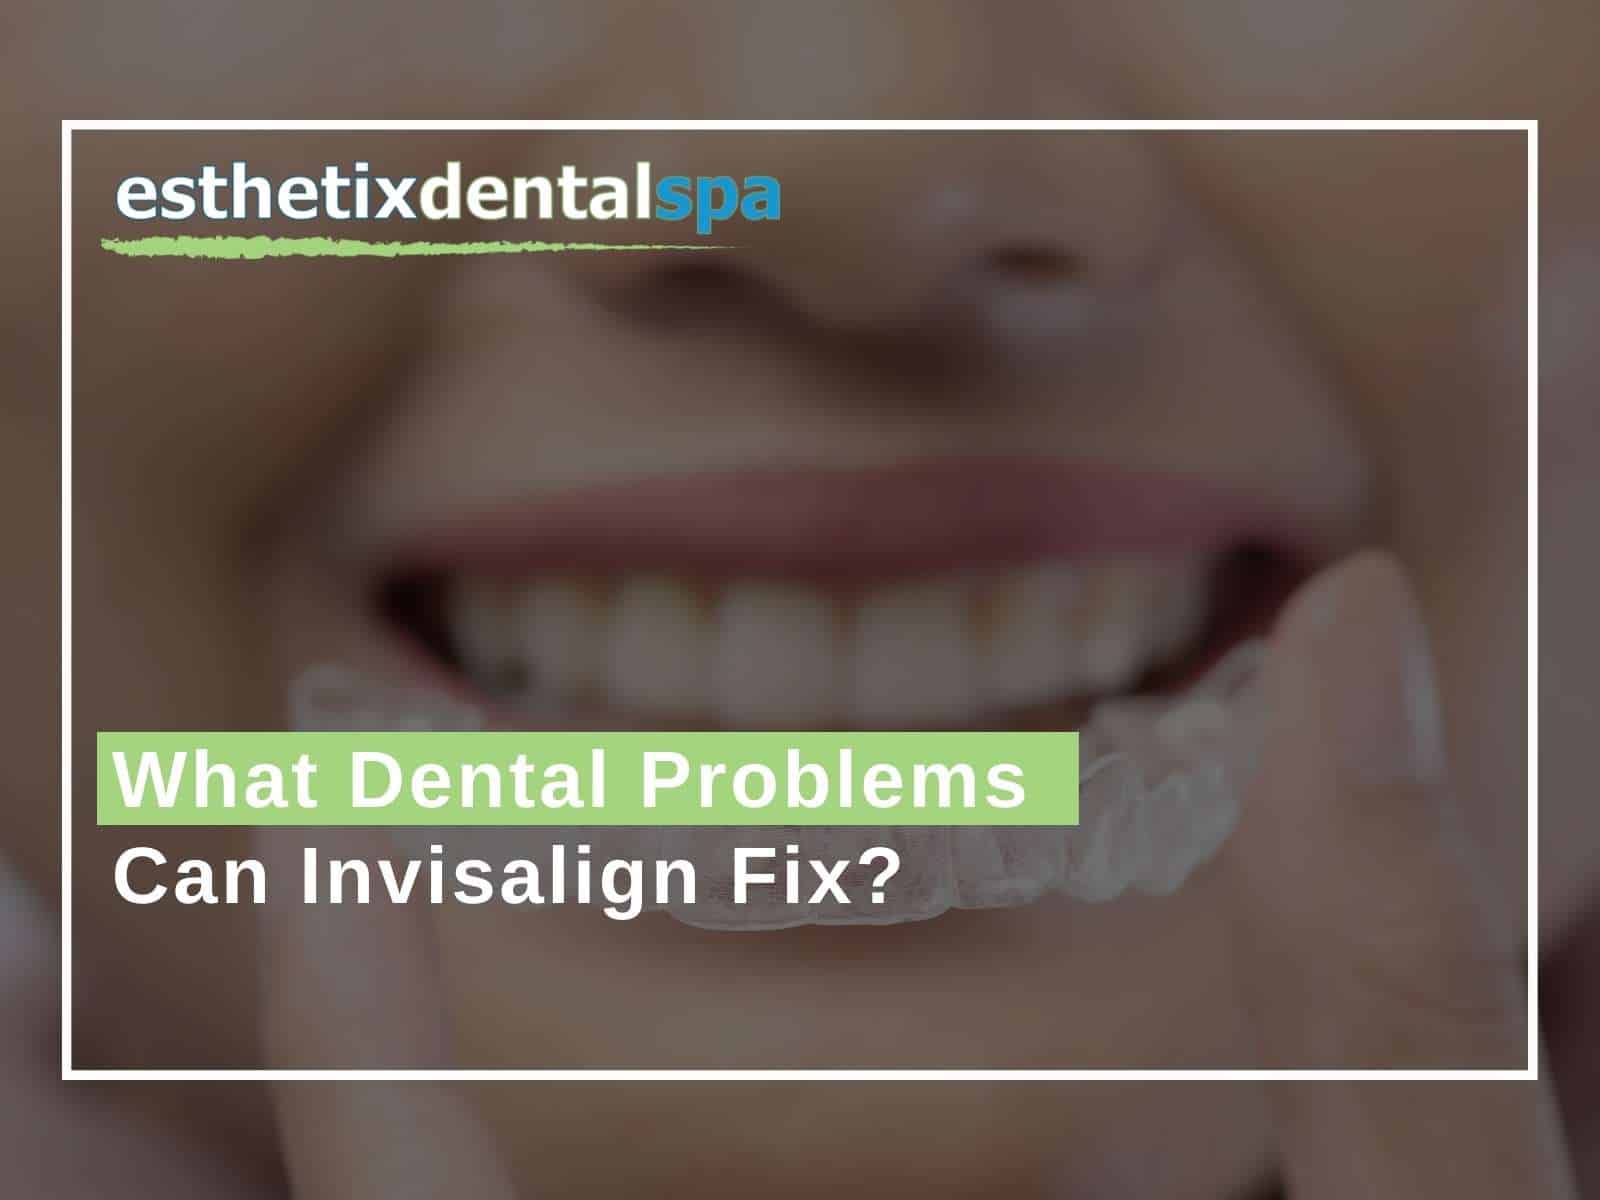 What Dental Problems Can Invisalign Fix